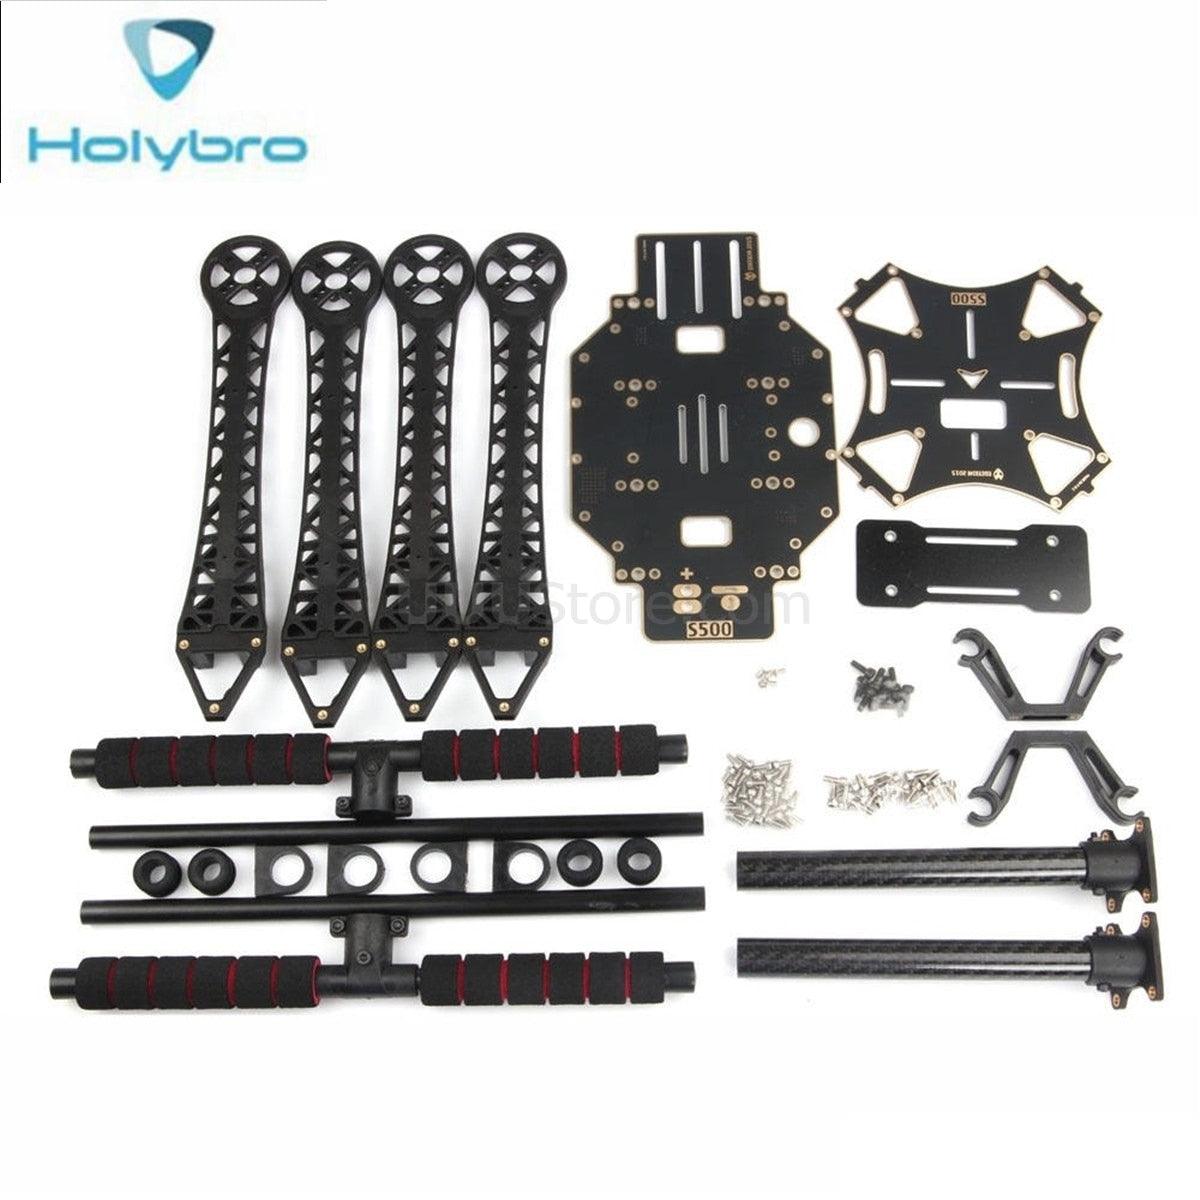 Holybro S500 Wheelbase Frame - 10 Inch 480mm Kit for RC Drone Quadcopter Spare DIY Accessories Replacment Parts - RCDrone